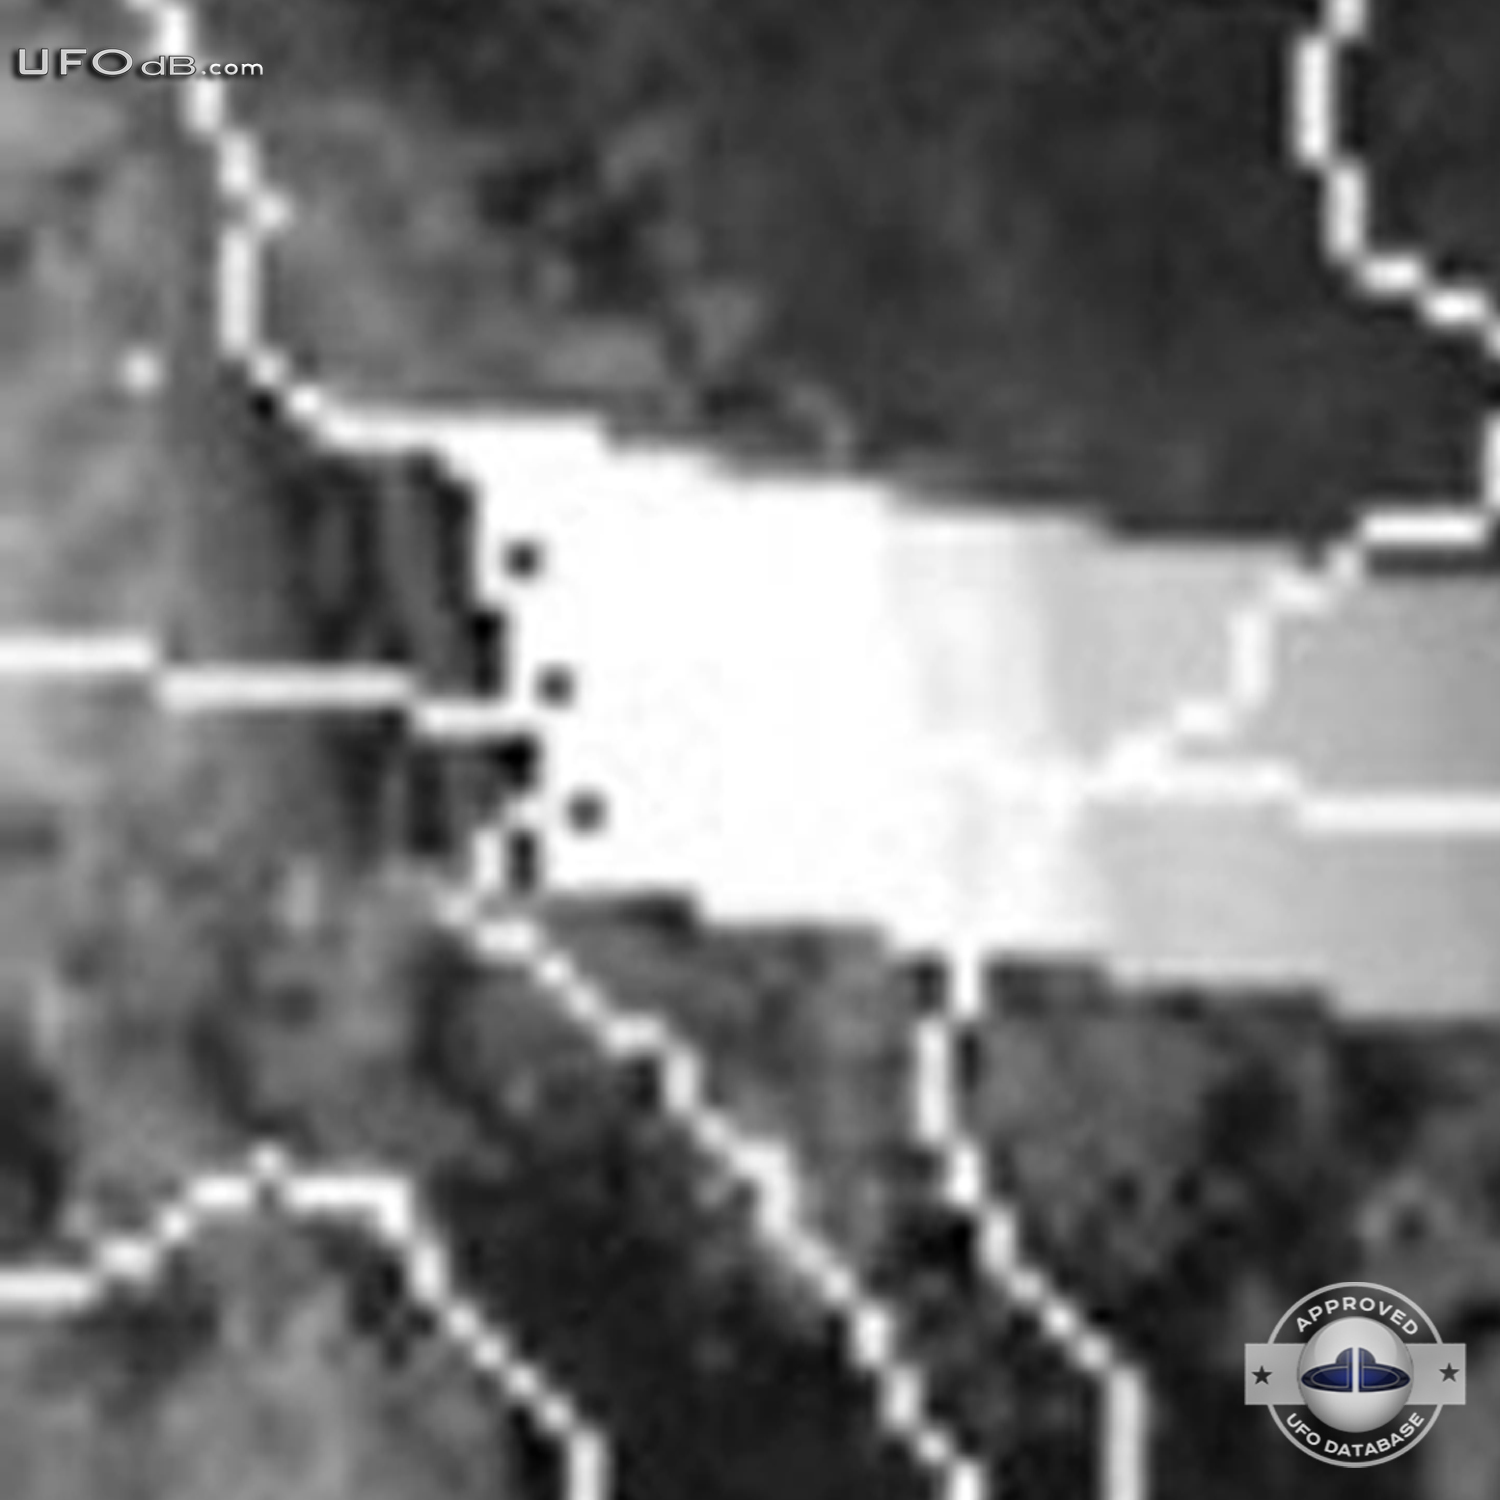 Satellite catches UFOs passing over the south of Taiwan | May 19 2011 UFO Picture #308-5